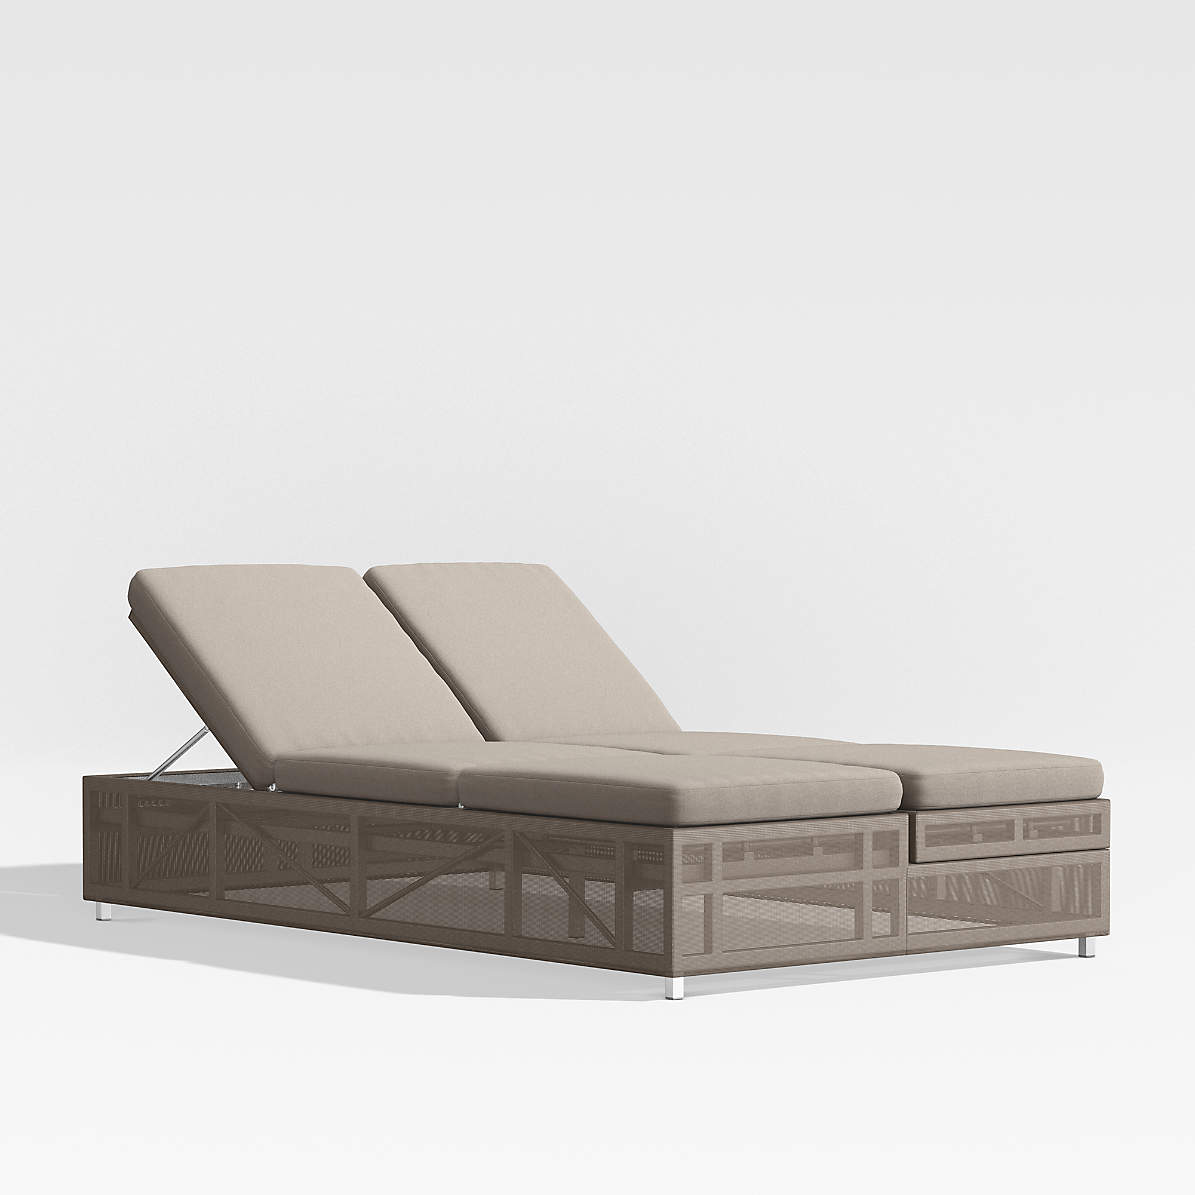 Dune Double Chaise Lounge